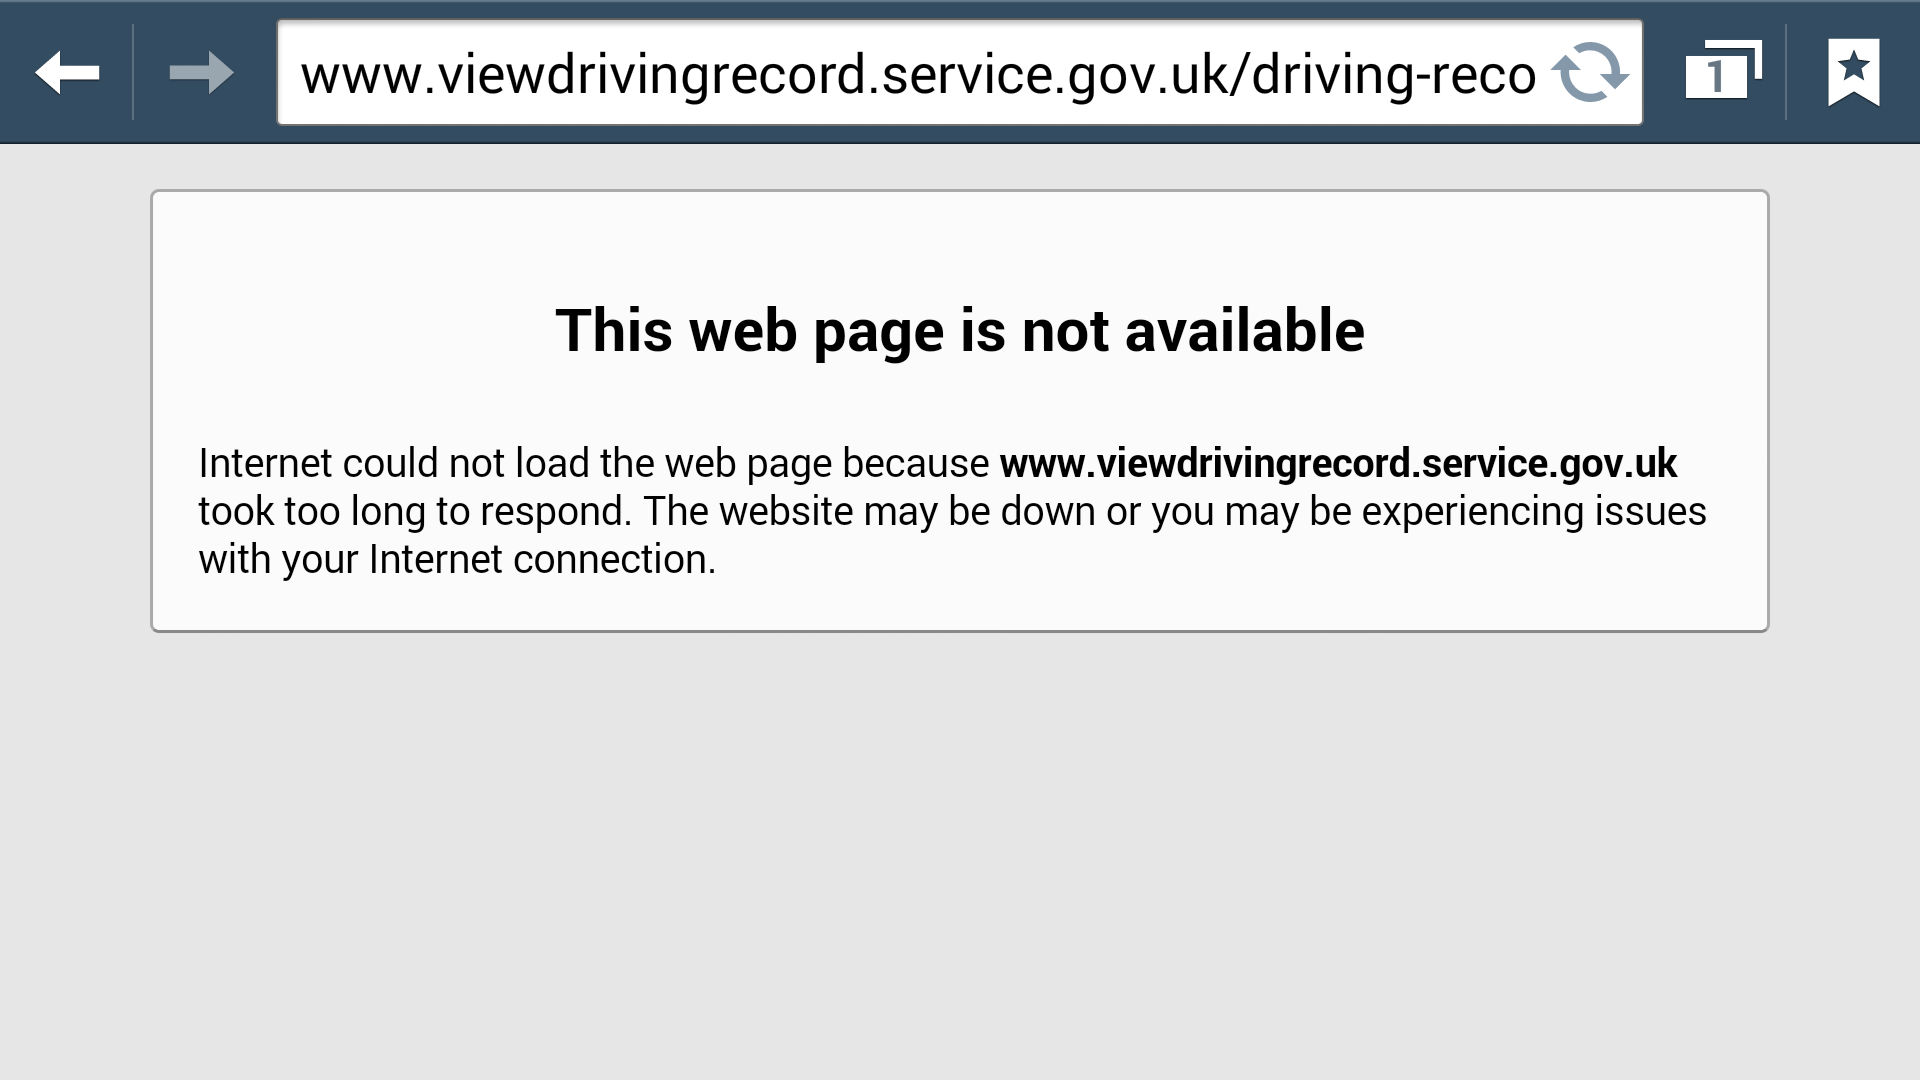 Well that's a good start - DVLA licence record check site down on day one